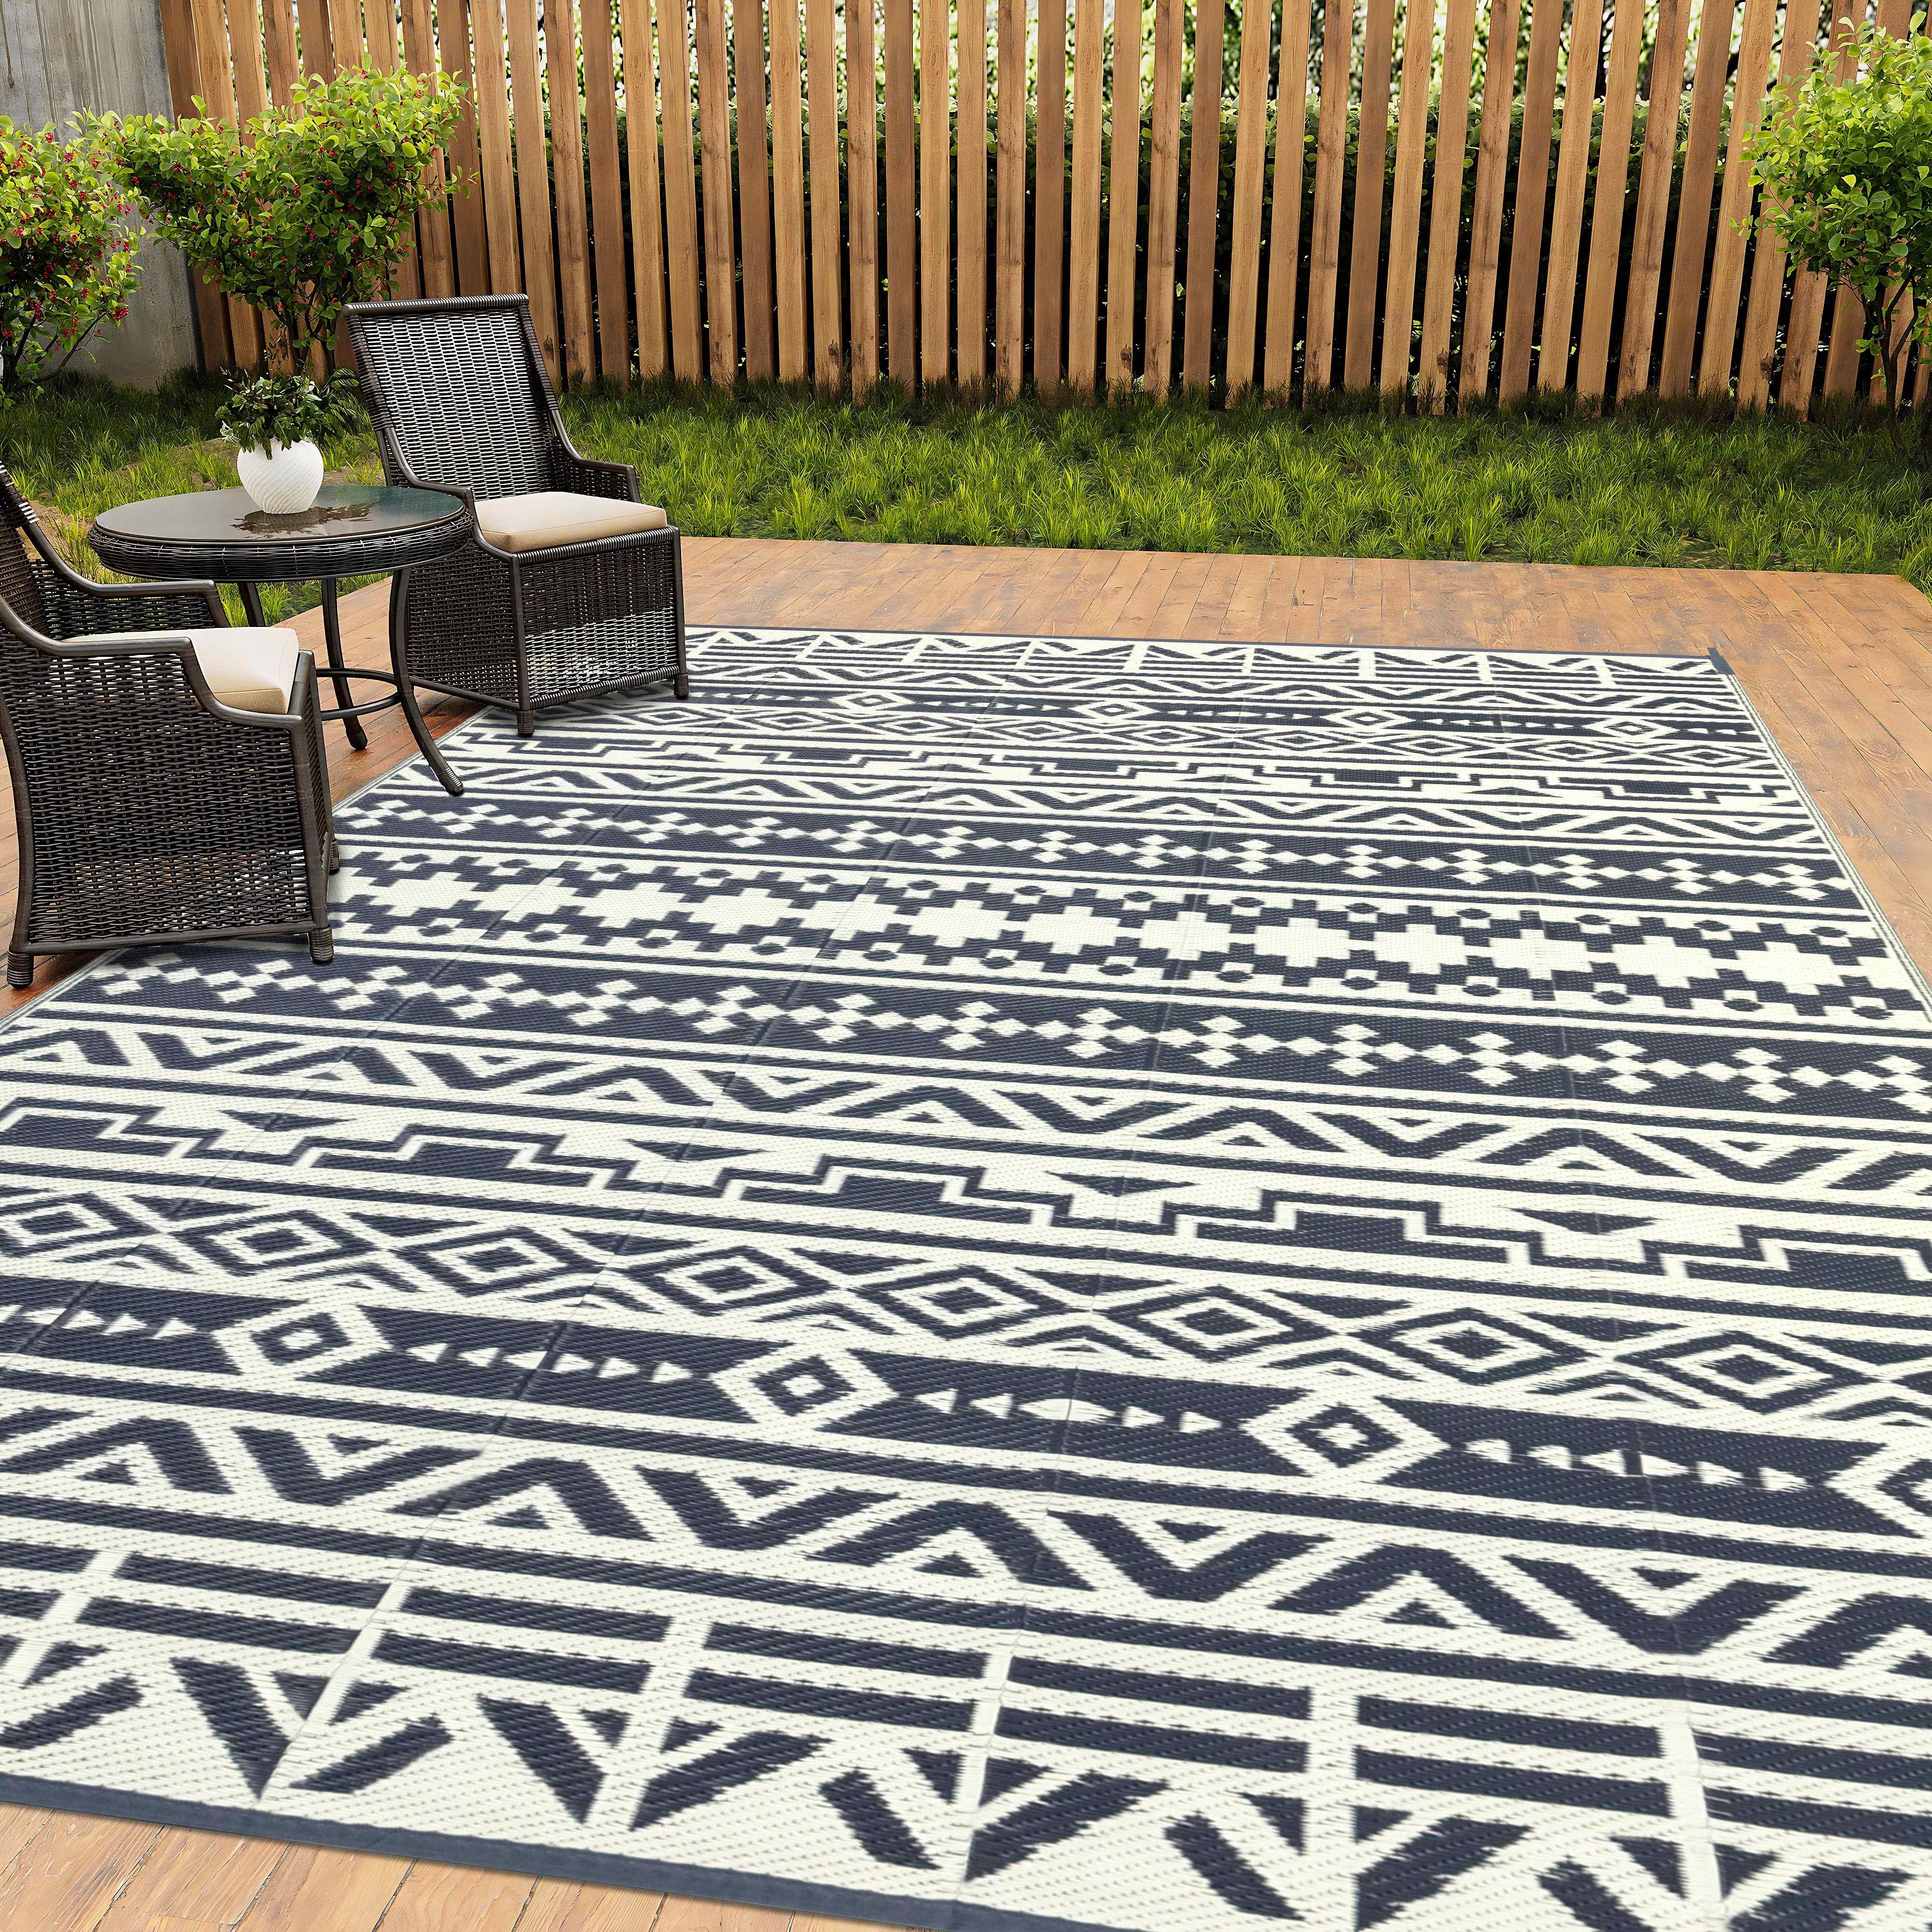 

Reversible Outdoor Rug, Bohemian Black And Tan Pattern, 8x10 Ft, Waterproof, Easy-to-clean, Portable With Free Carrier Bag And Rug Stakes, Ideal For Patio, Deck, Camping, Beach